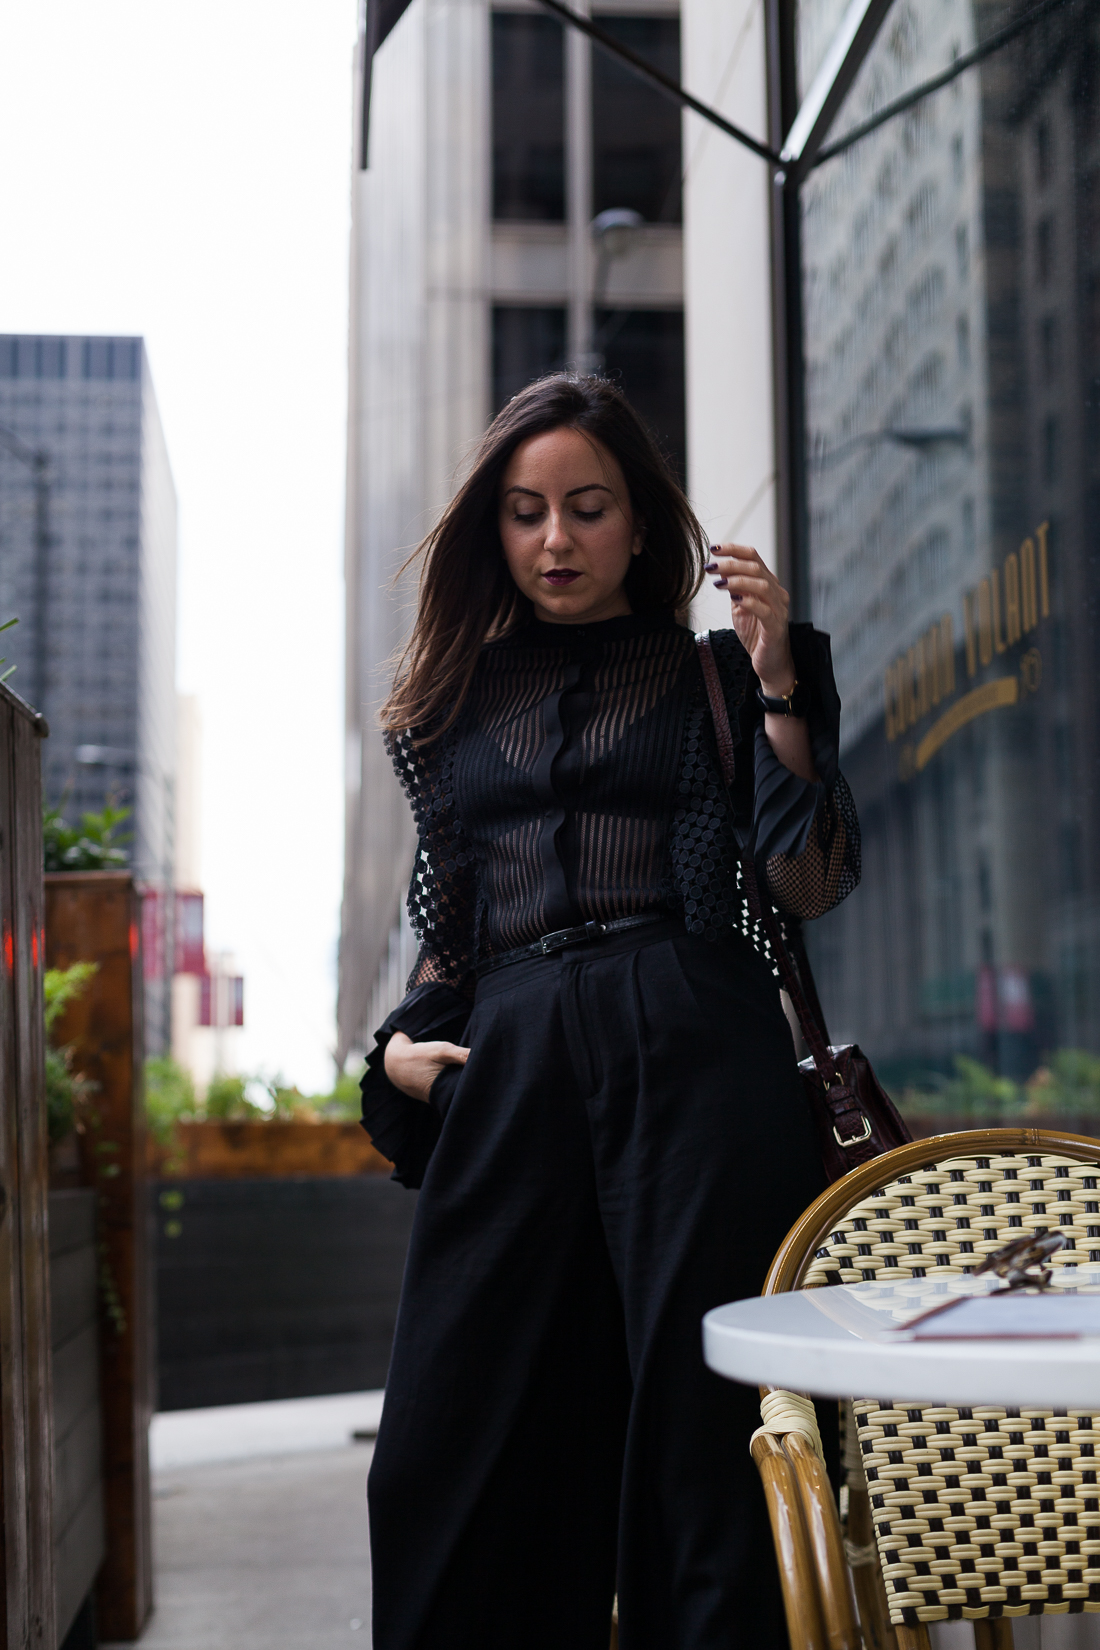 How To Style a Sheer, Black Lace Top - Nomad Luxuries